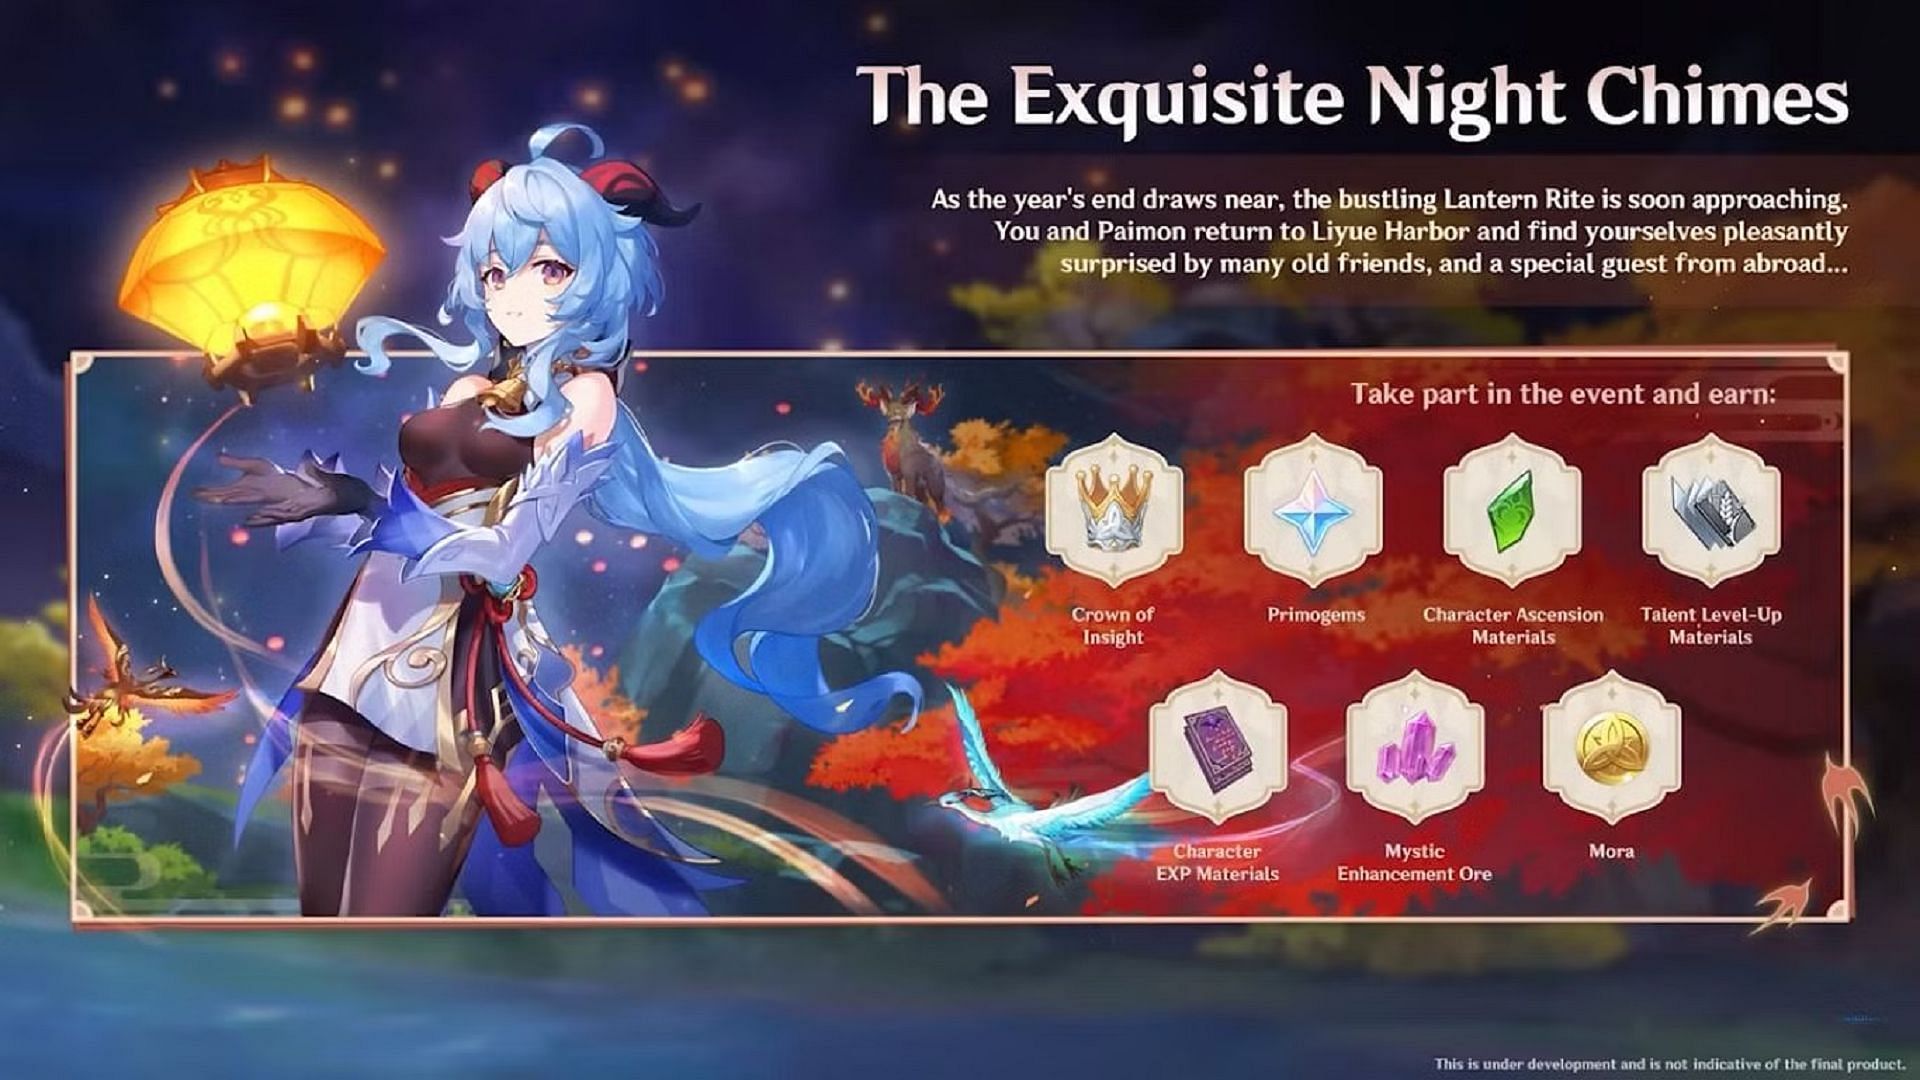 The Exquisite Night Chimes event banner (Image via HoYoverse)